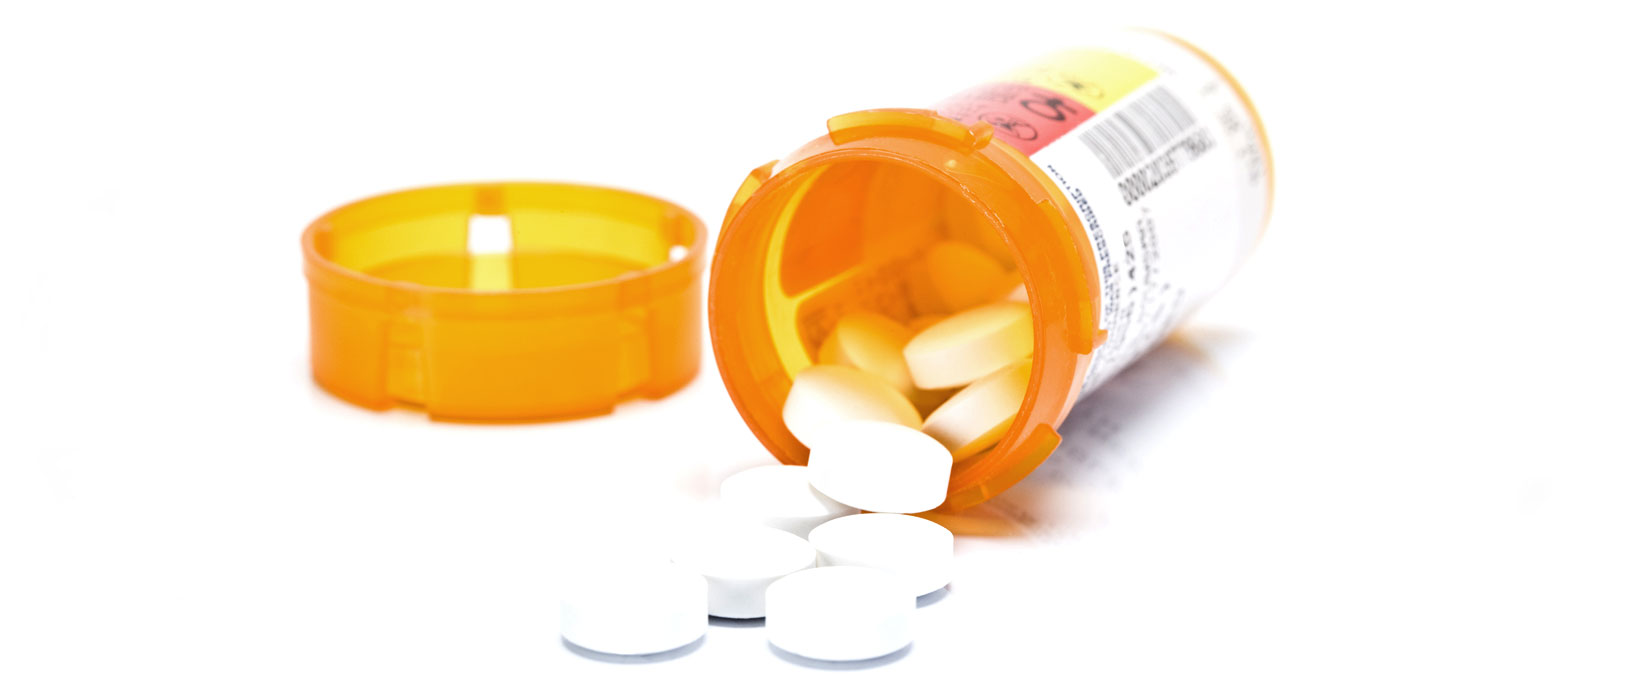 Free Prescription Drugs for Low Income and Everyone Else